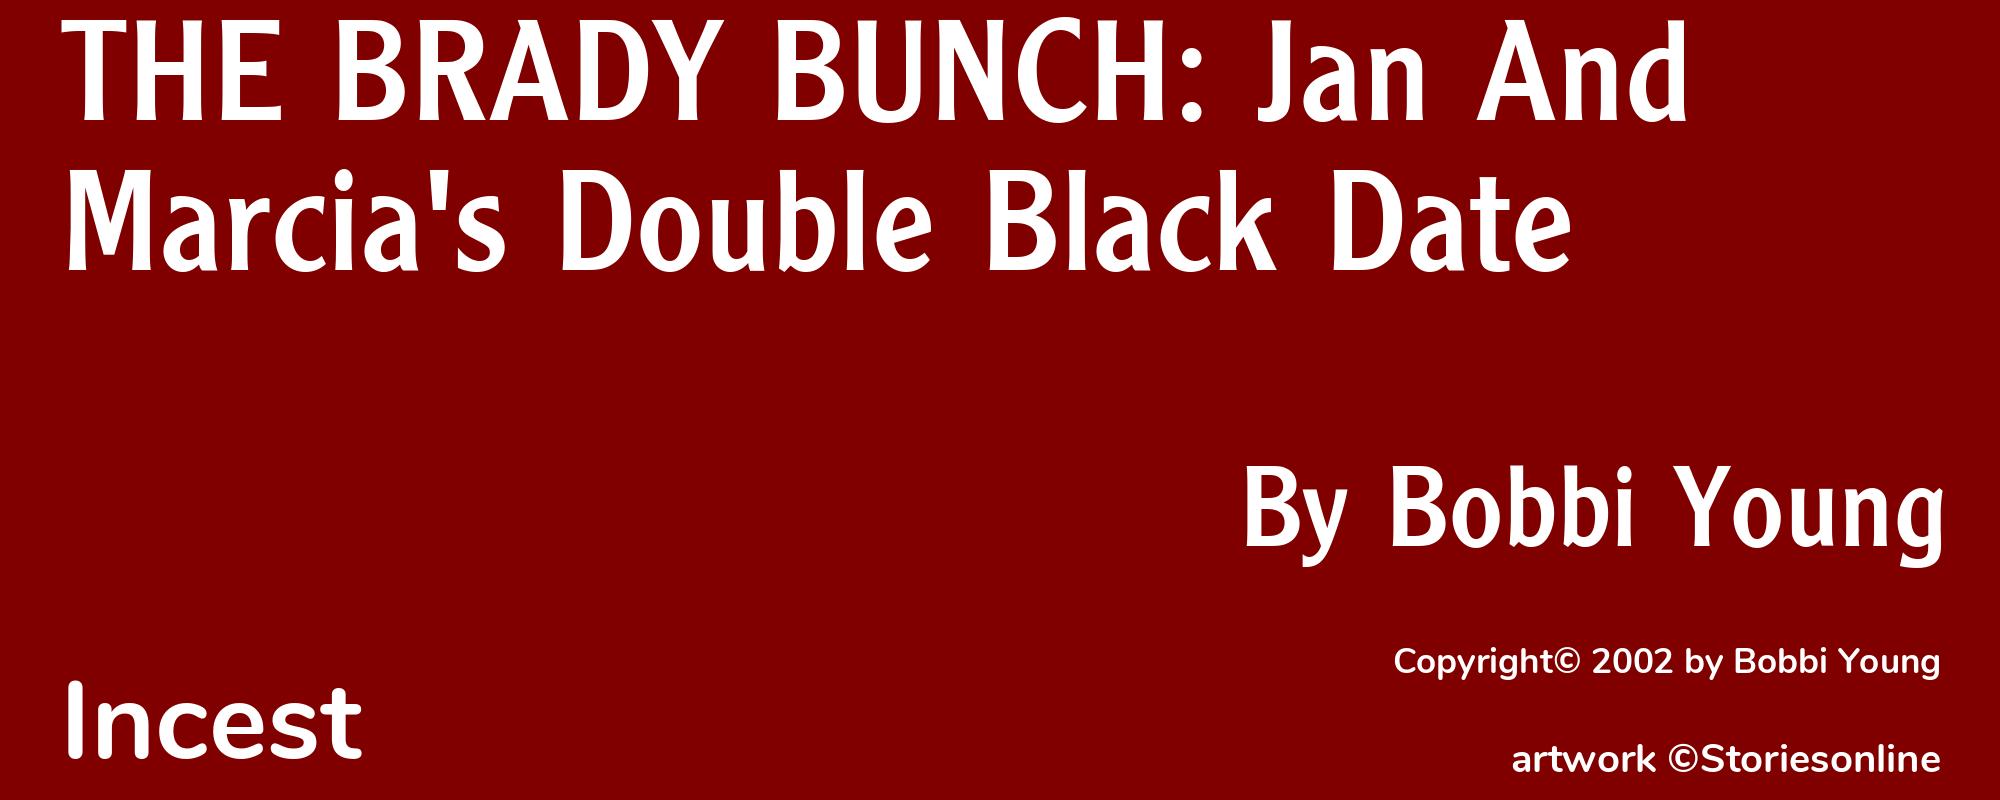 THE BRADY BUNCH: Jan And Marcia's Double Black Date - Cover